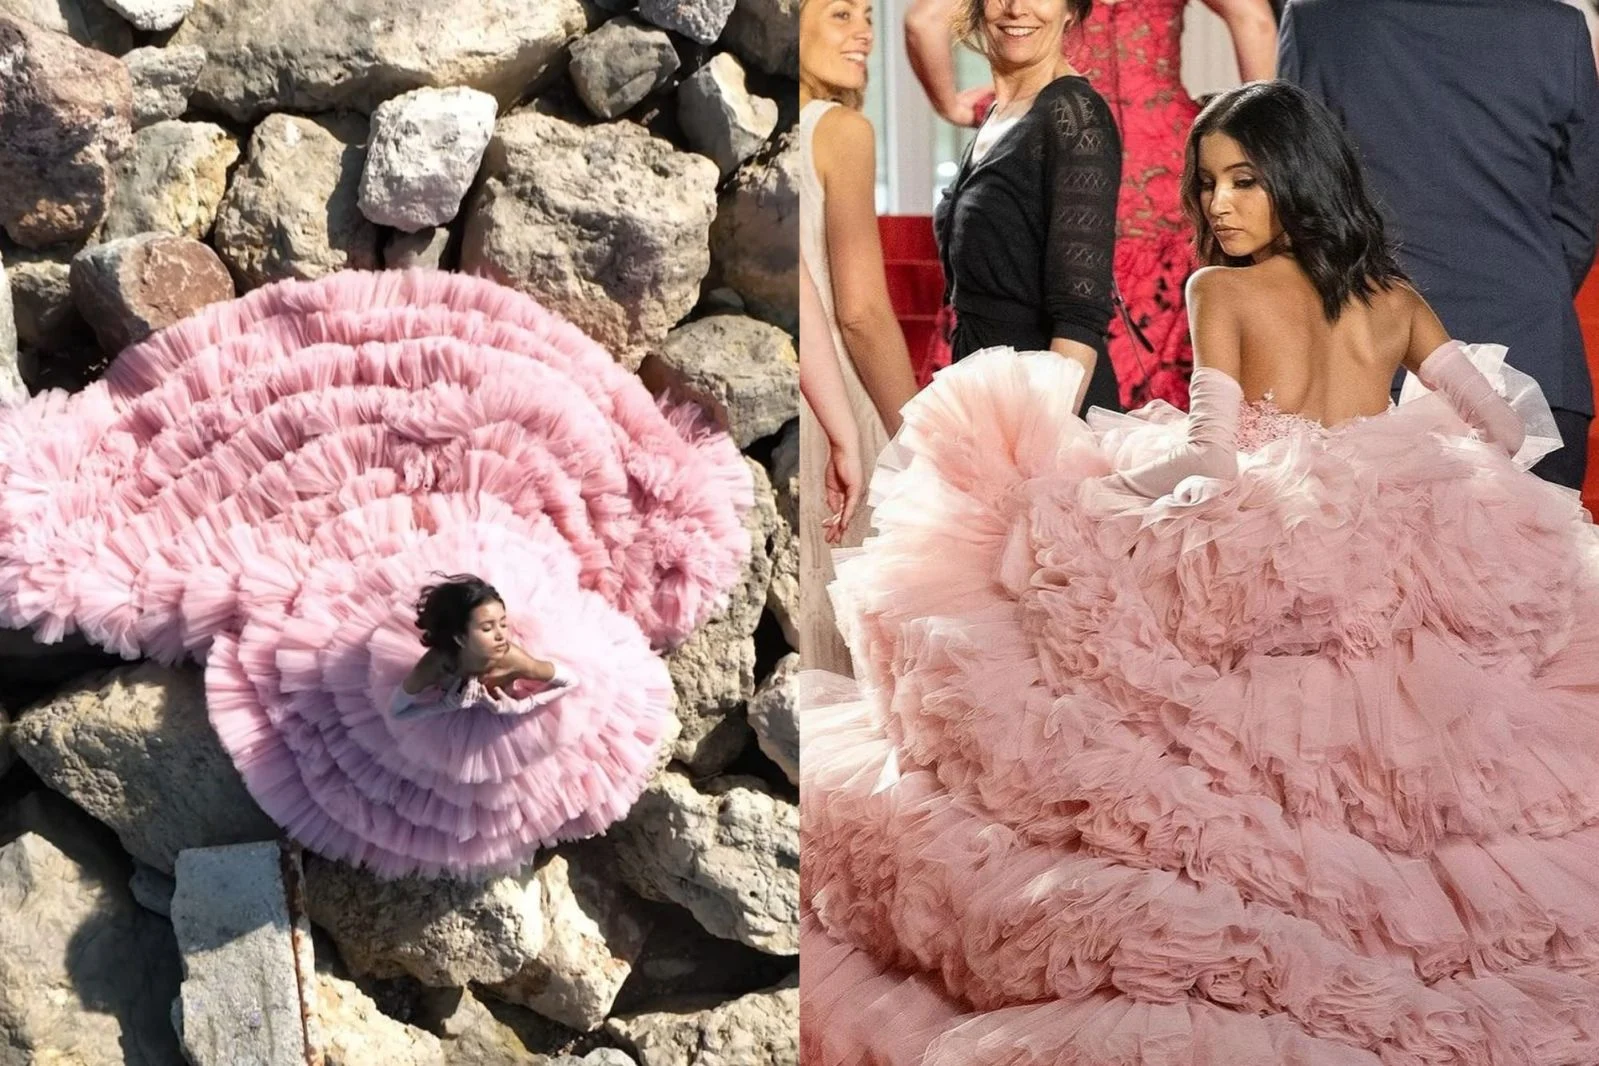 The pink dress reportedly took Nancy 